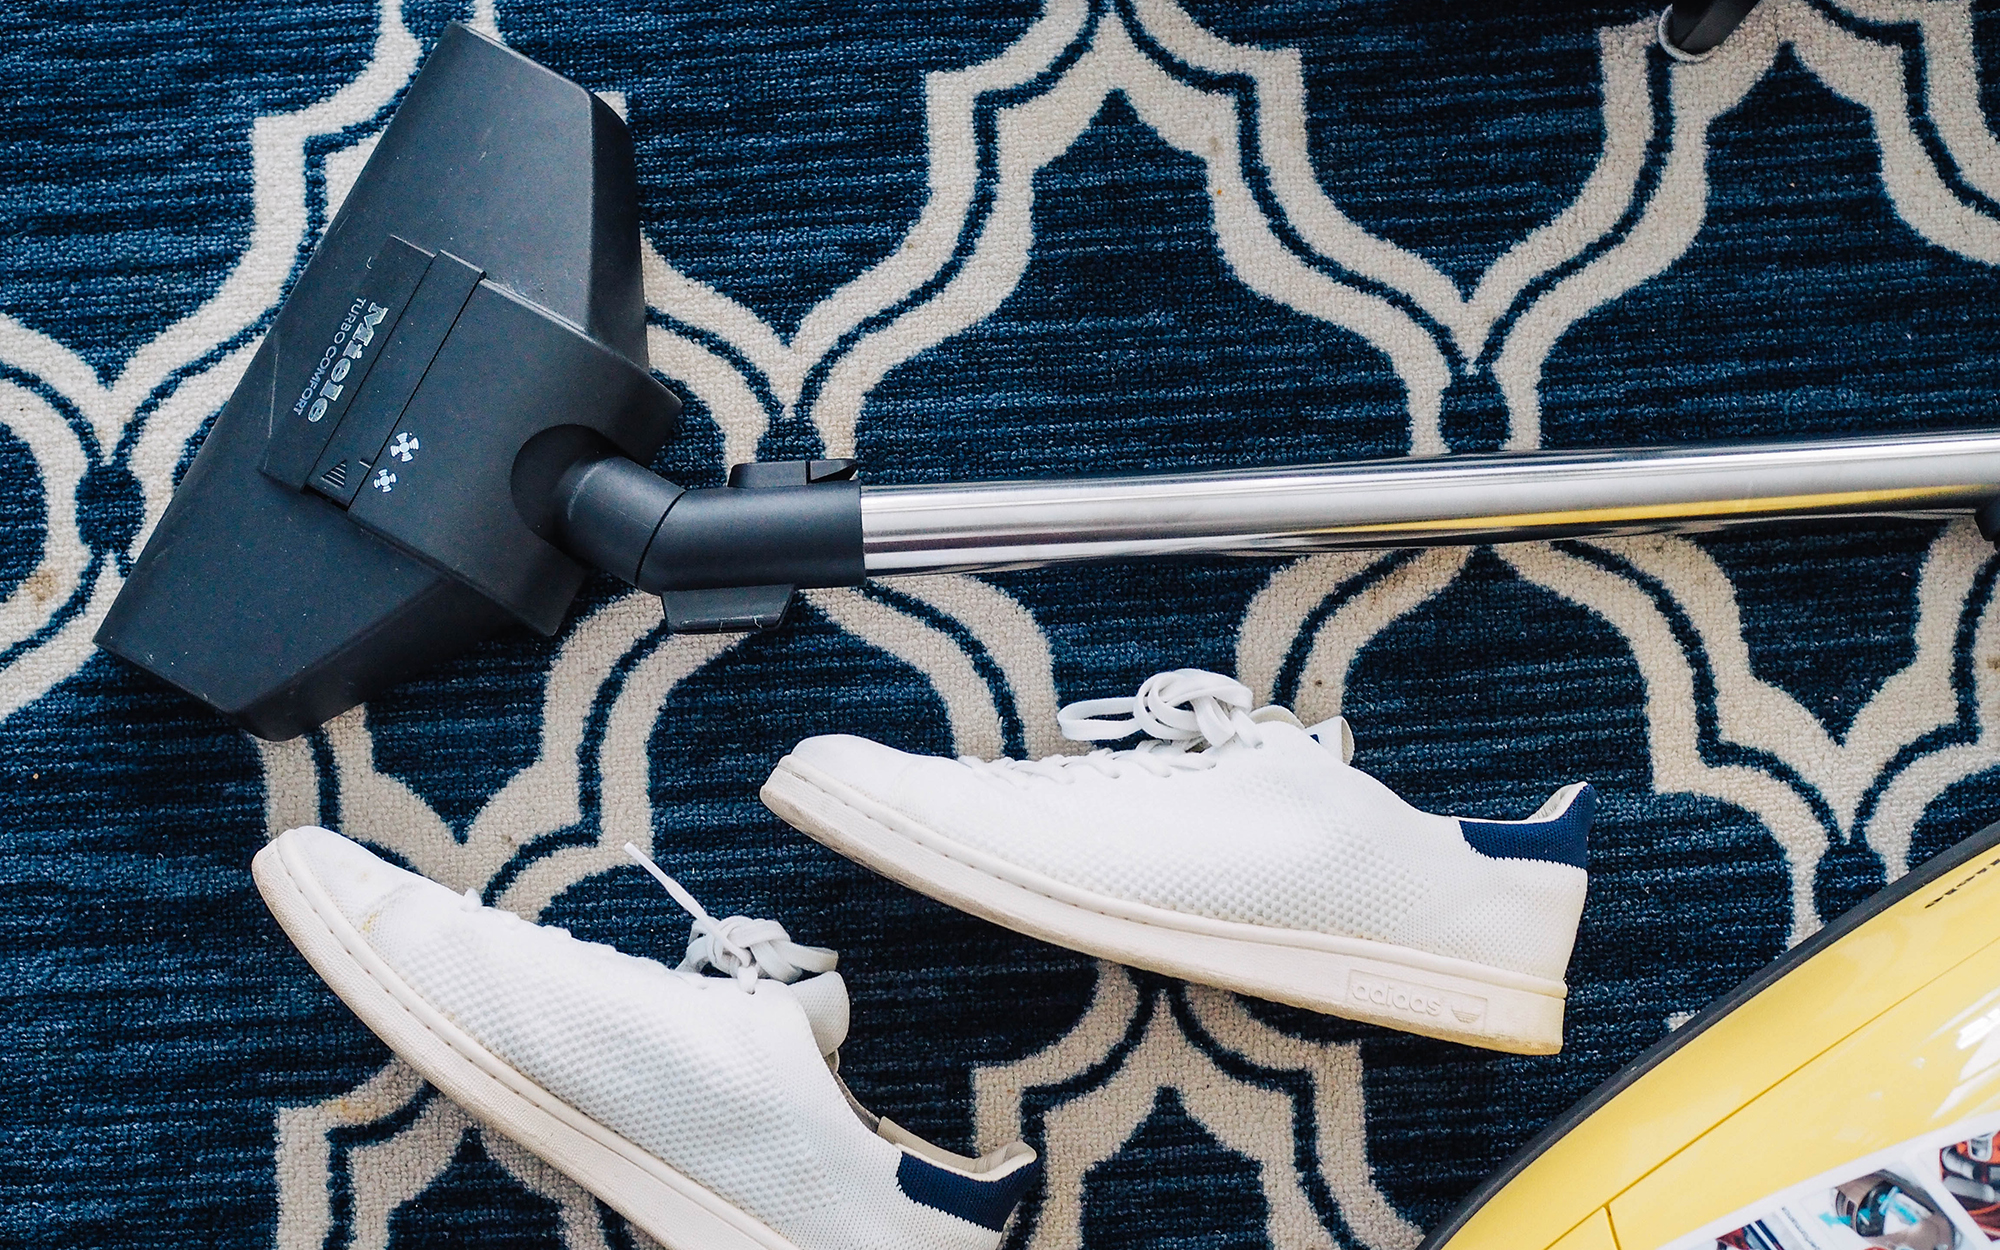 white sneakers and vacuum cleaner on blue and white rug